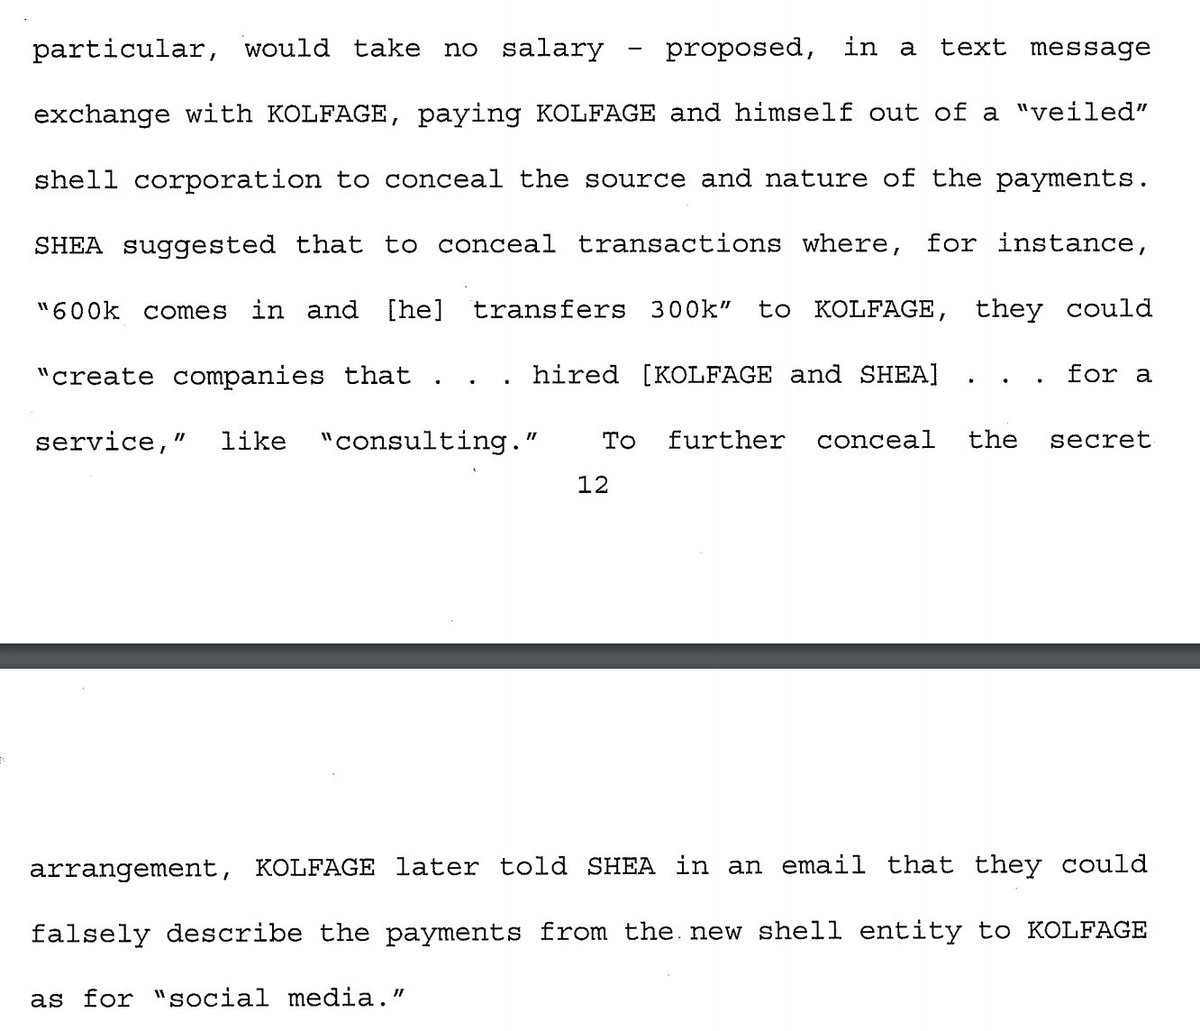 Setting up sham non-profits to siphon wall funds to "volunteers" ... the details in this indictment are really something. Also the federal government thanks you for emailing and texting the details of your alleged crimes.  https://www.justice.gov/usao-sdny/press-release/file/1306611/download